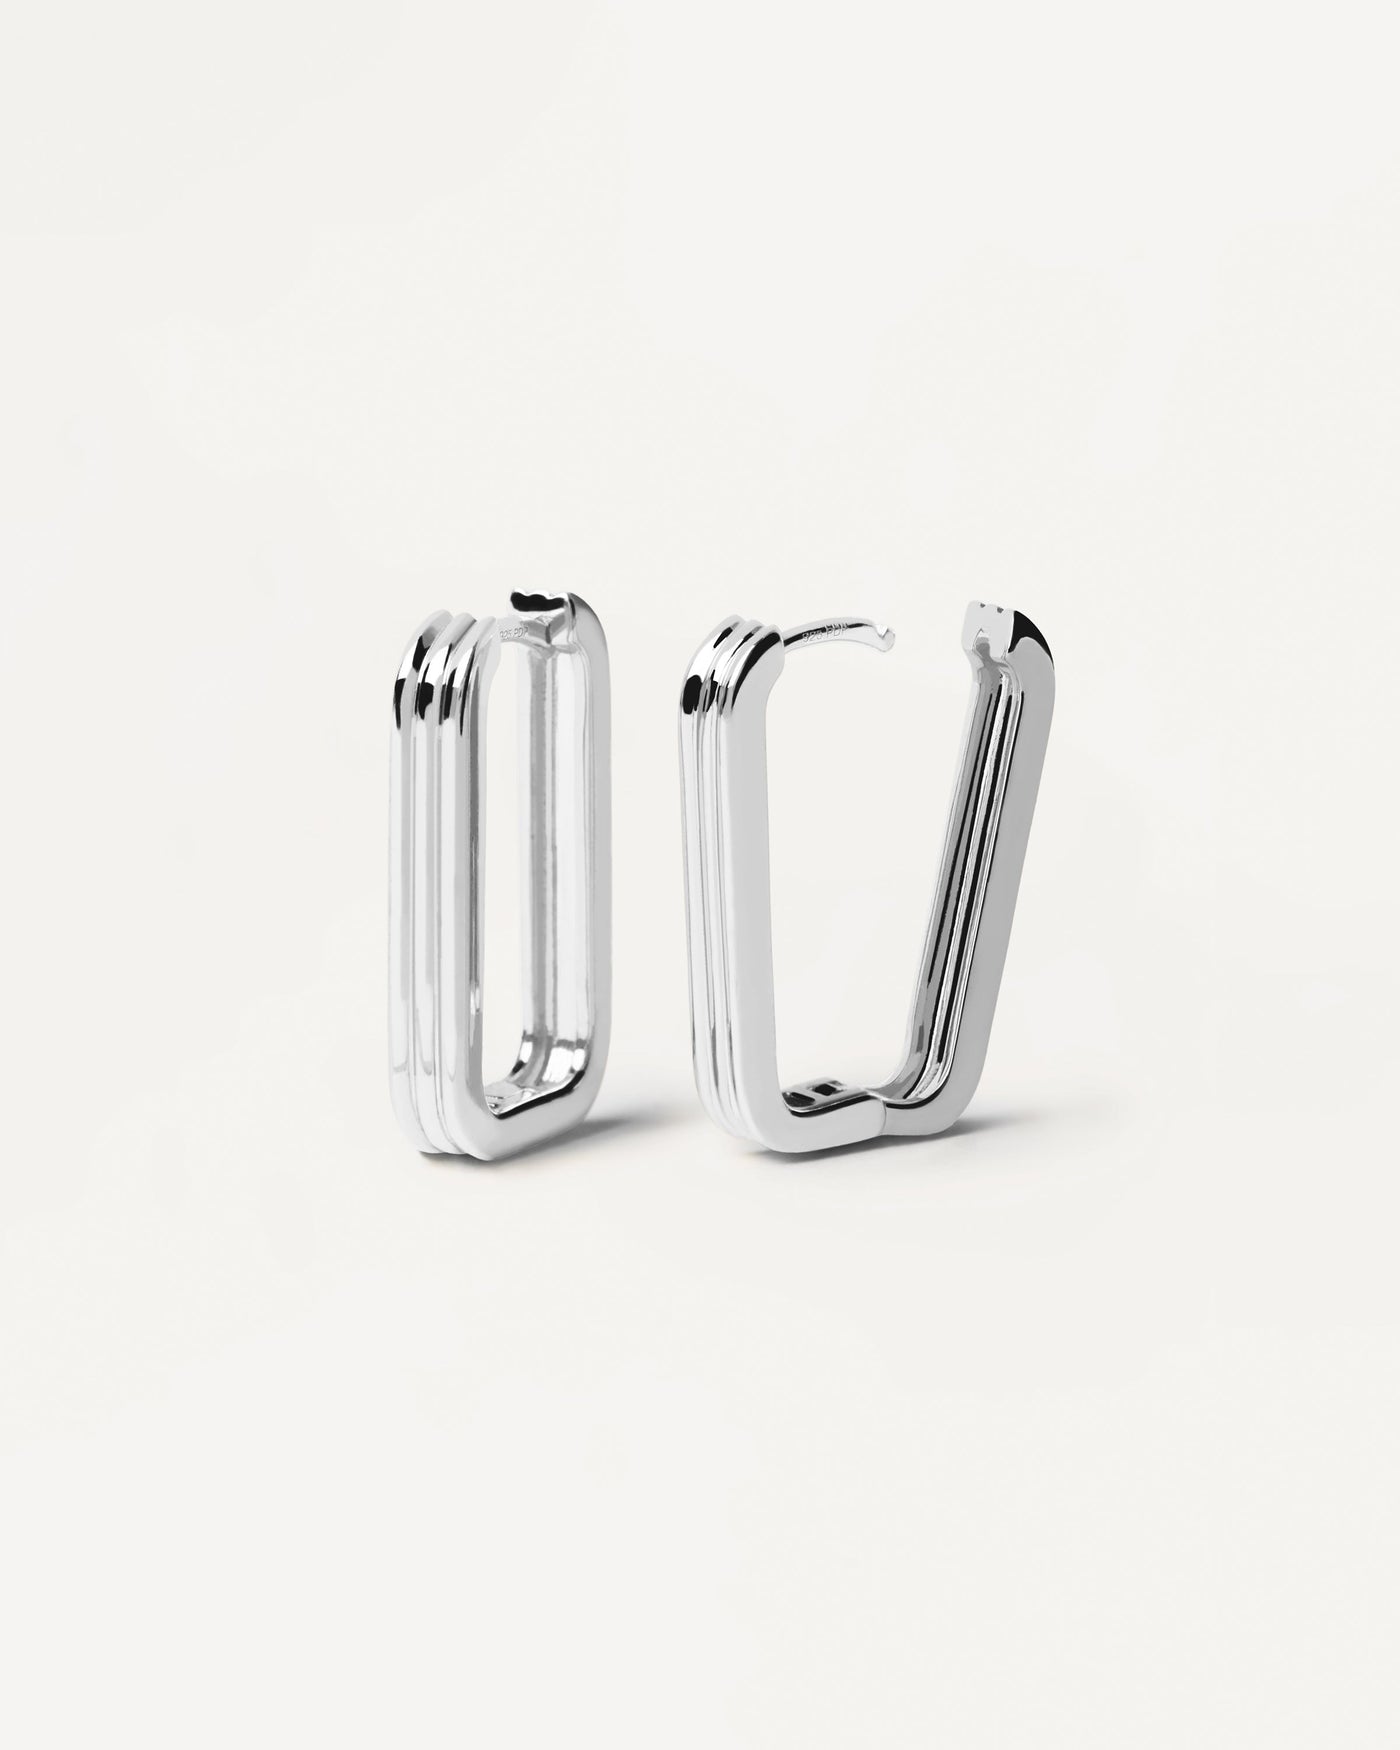 2023 Selection | Super Nova Silver Earrings. Squarred hoops in sterling silver with 3 bands design. Get the latest arrival from PDPAOLA. Place your order safely and get this Best Seller. Free Shipping.